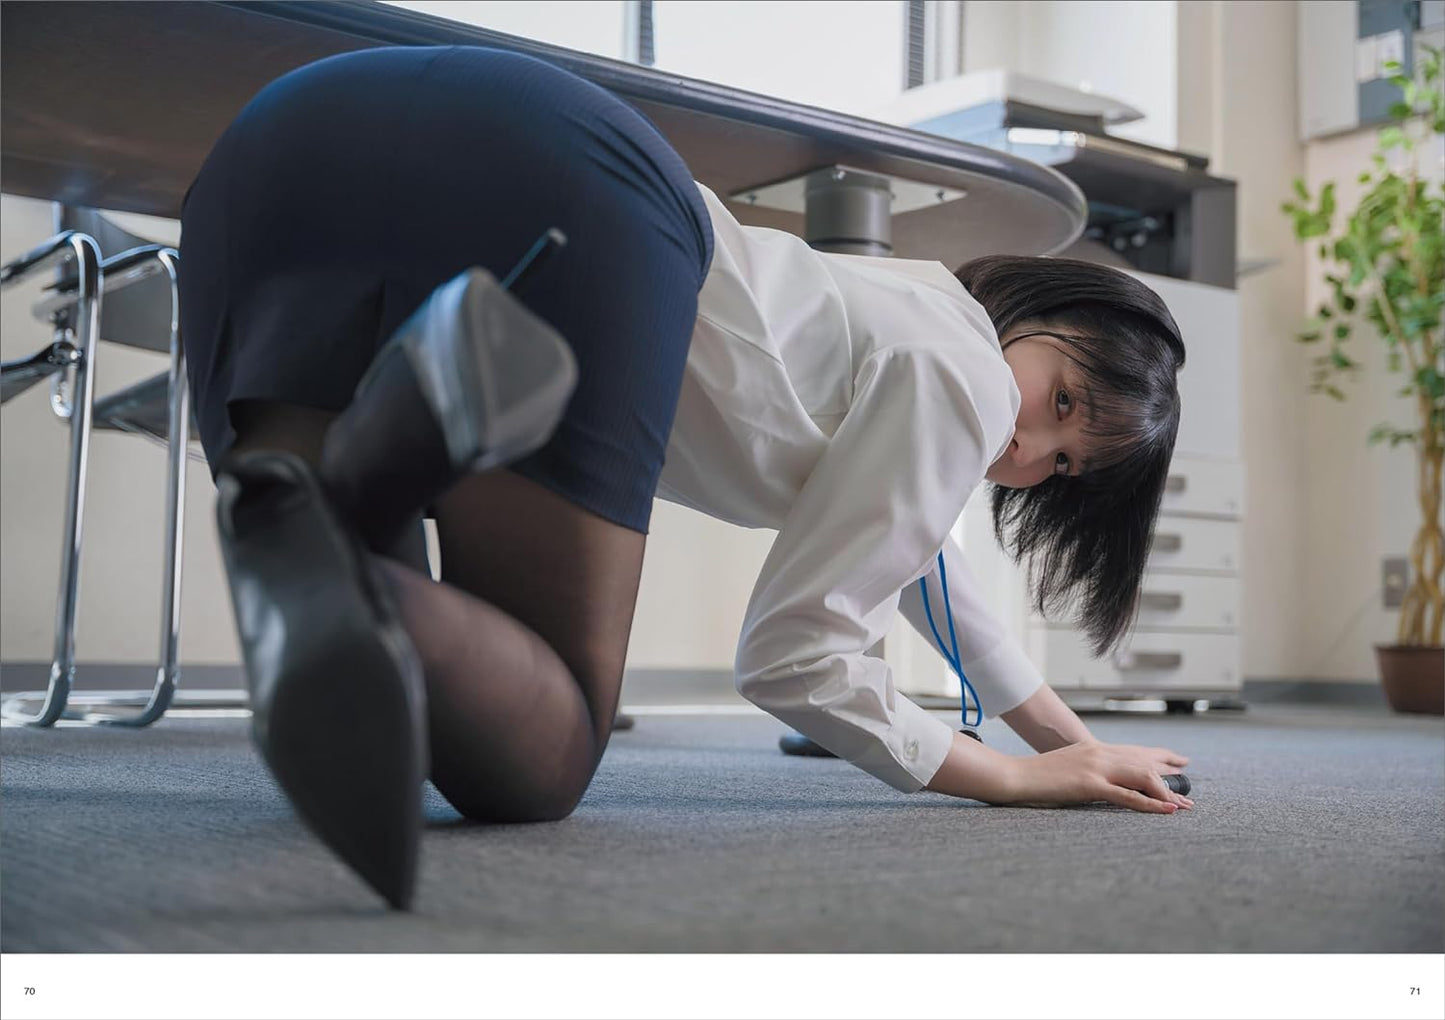 Office Worker Fetish Pose Collection